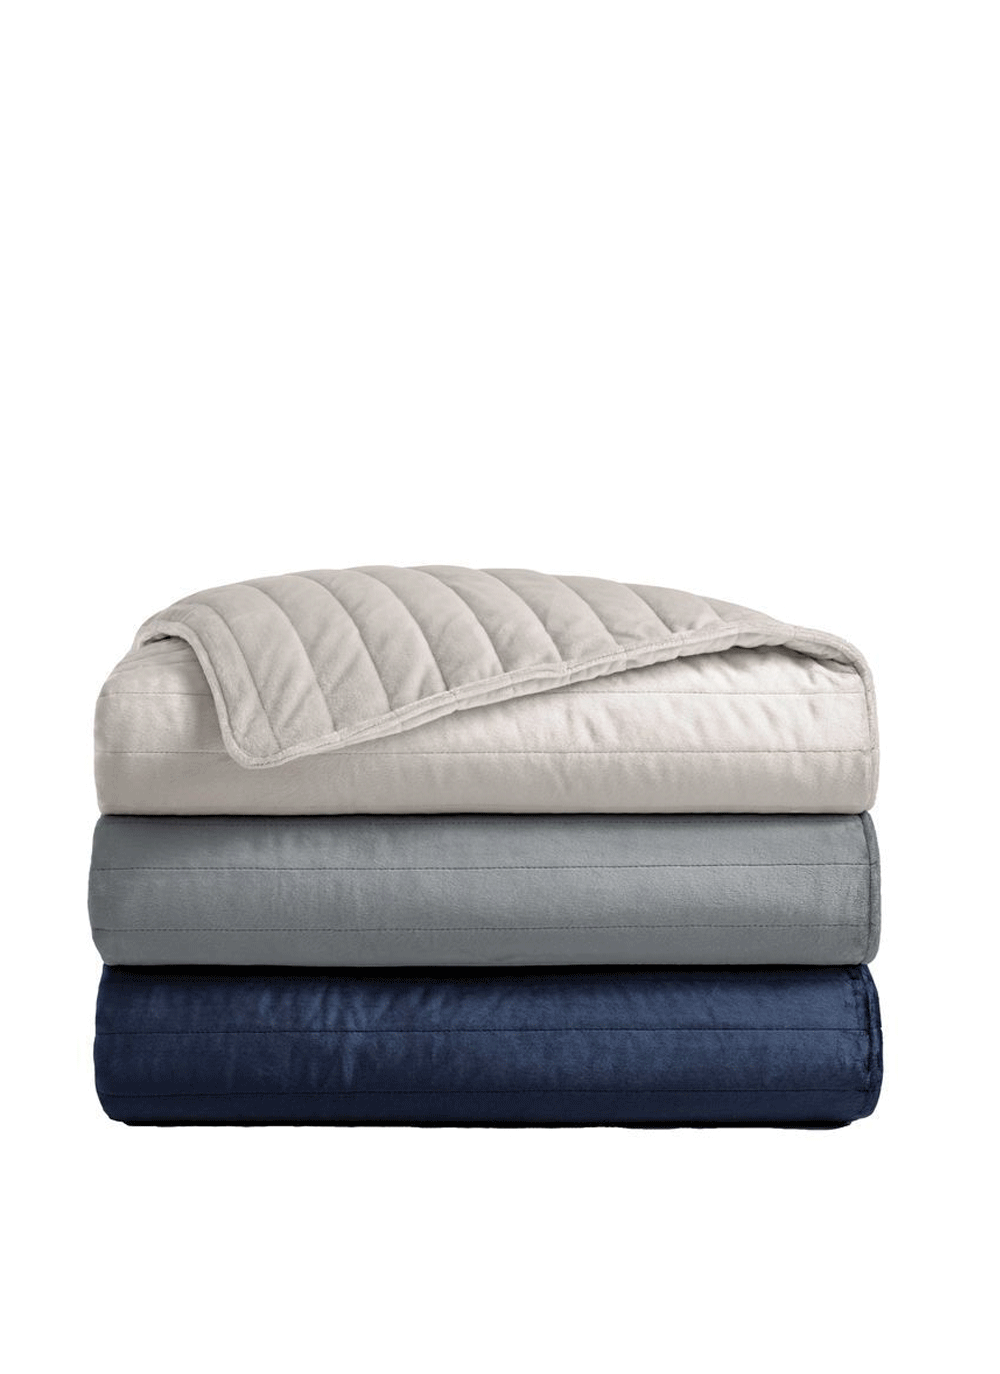 5 Best Weighted Blankets, Per Expert Reviews - Top-Rated Heavy Blankets